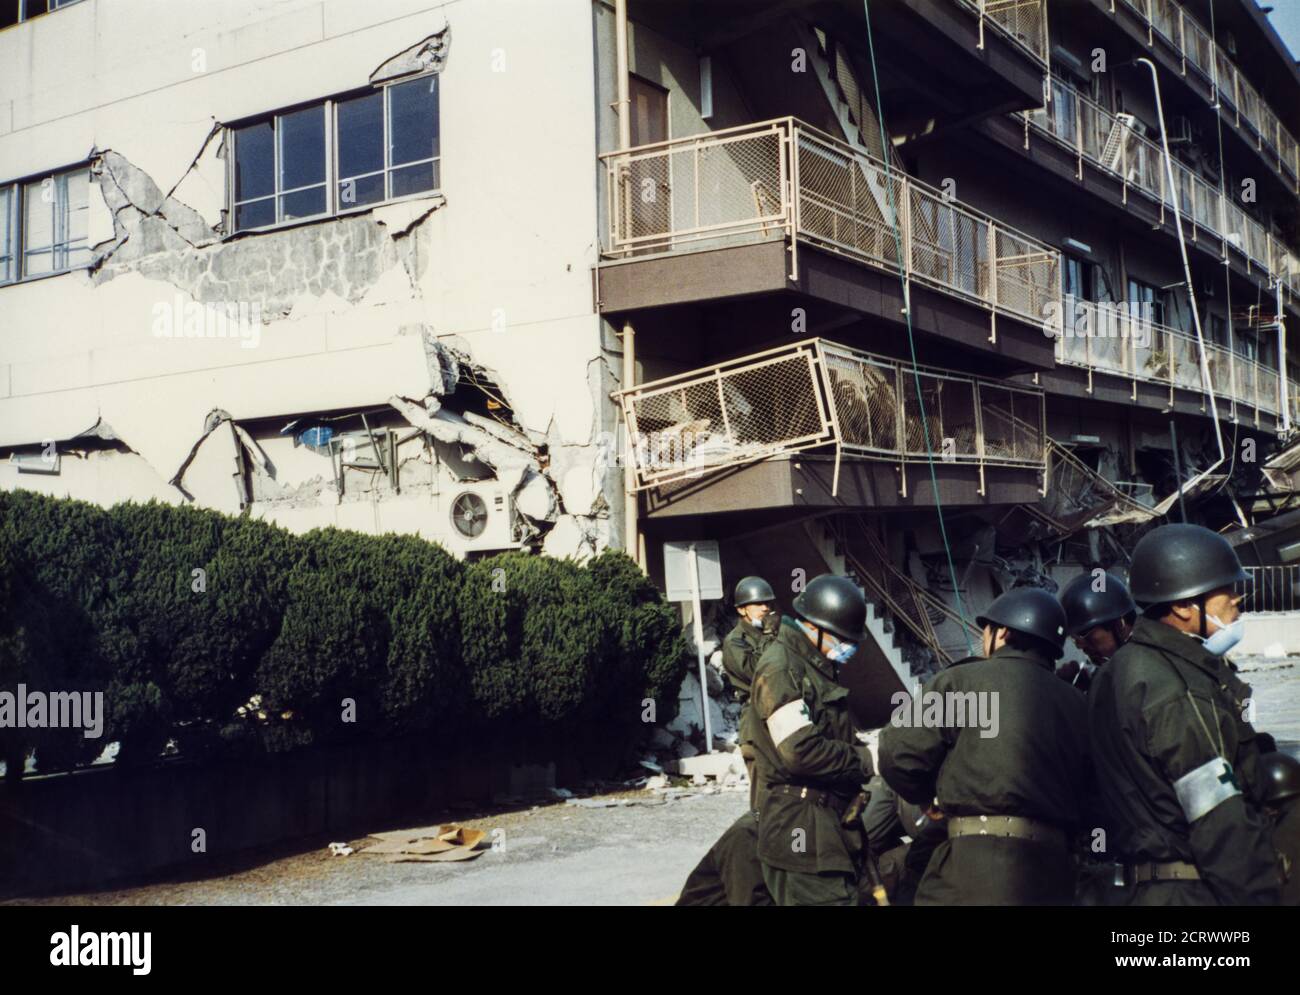 Japan Self Defense Force (JSDF) preparing for aid work in front of apartment damaged from the 1995 Great Hanshin Earthquake in Kobe, Japan Stock Photo